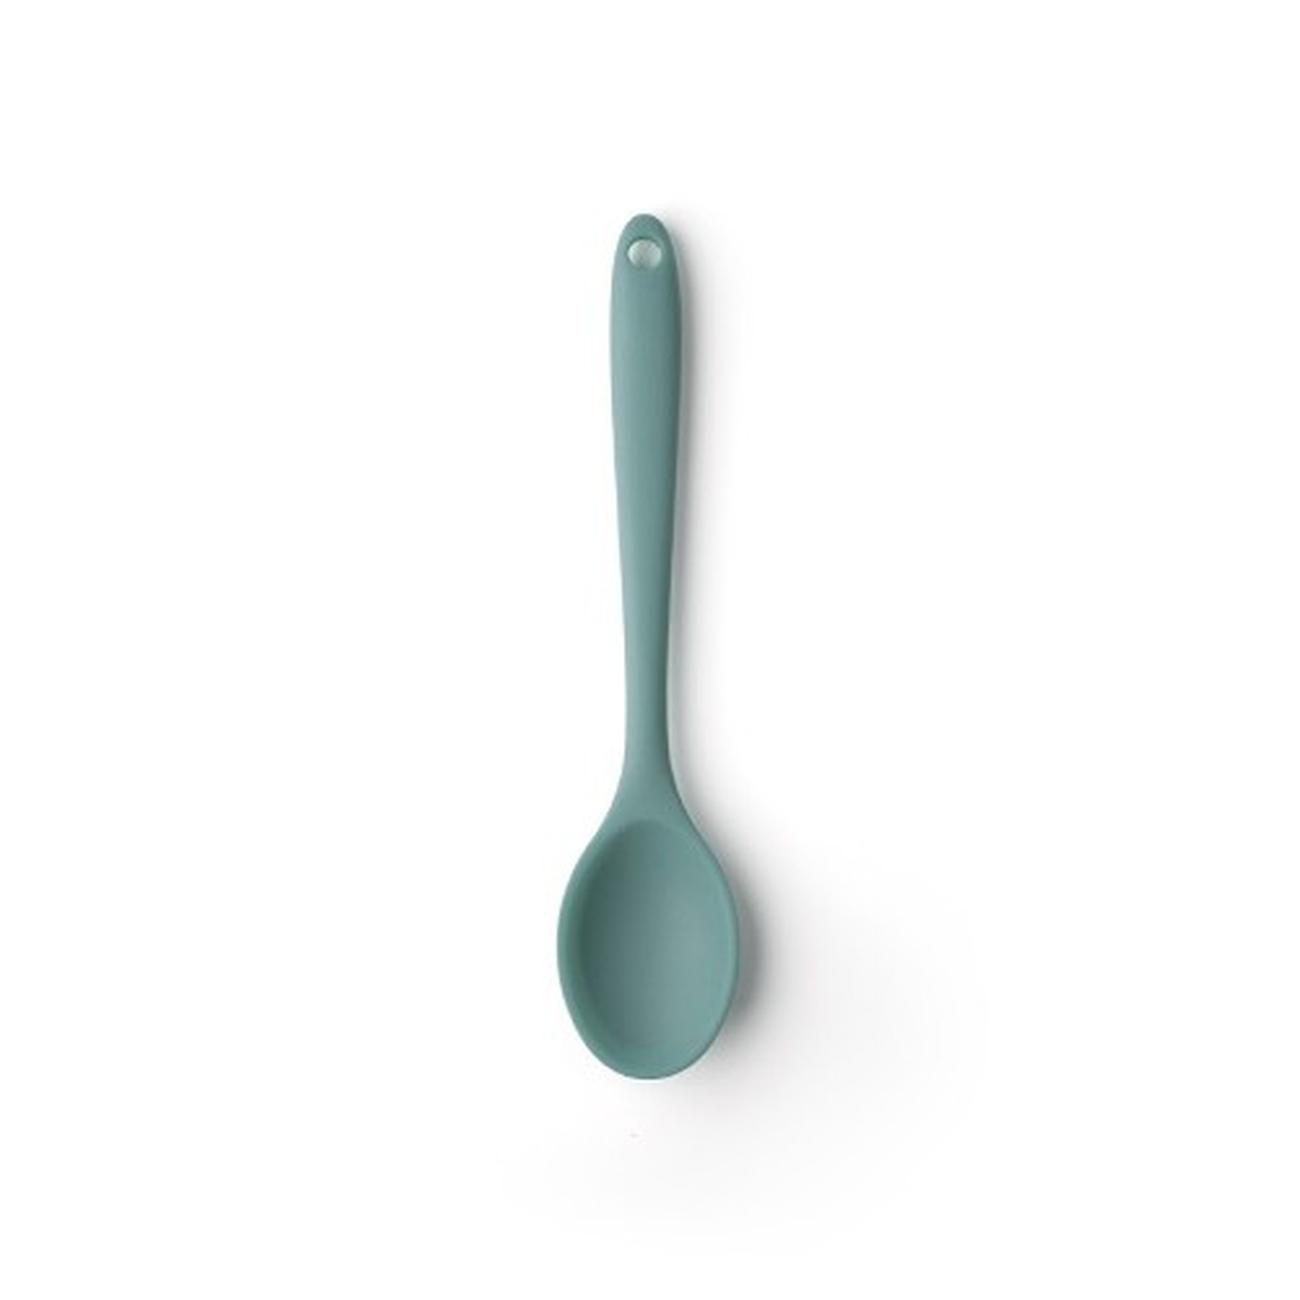 https://www.thekitchenwhisk.ie/contentfiles/productImages/Large/Taylors-Eye-Witness-Mini-Silicone-Spoon-Blue.jpg